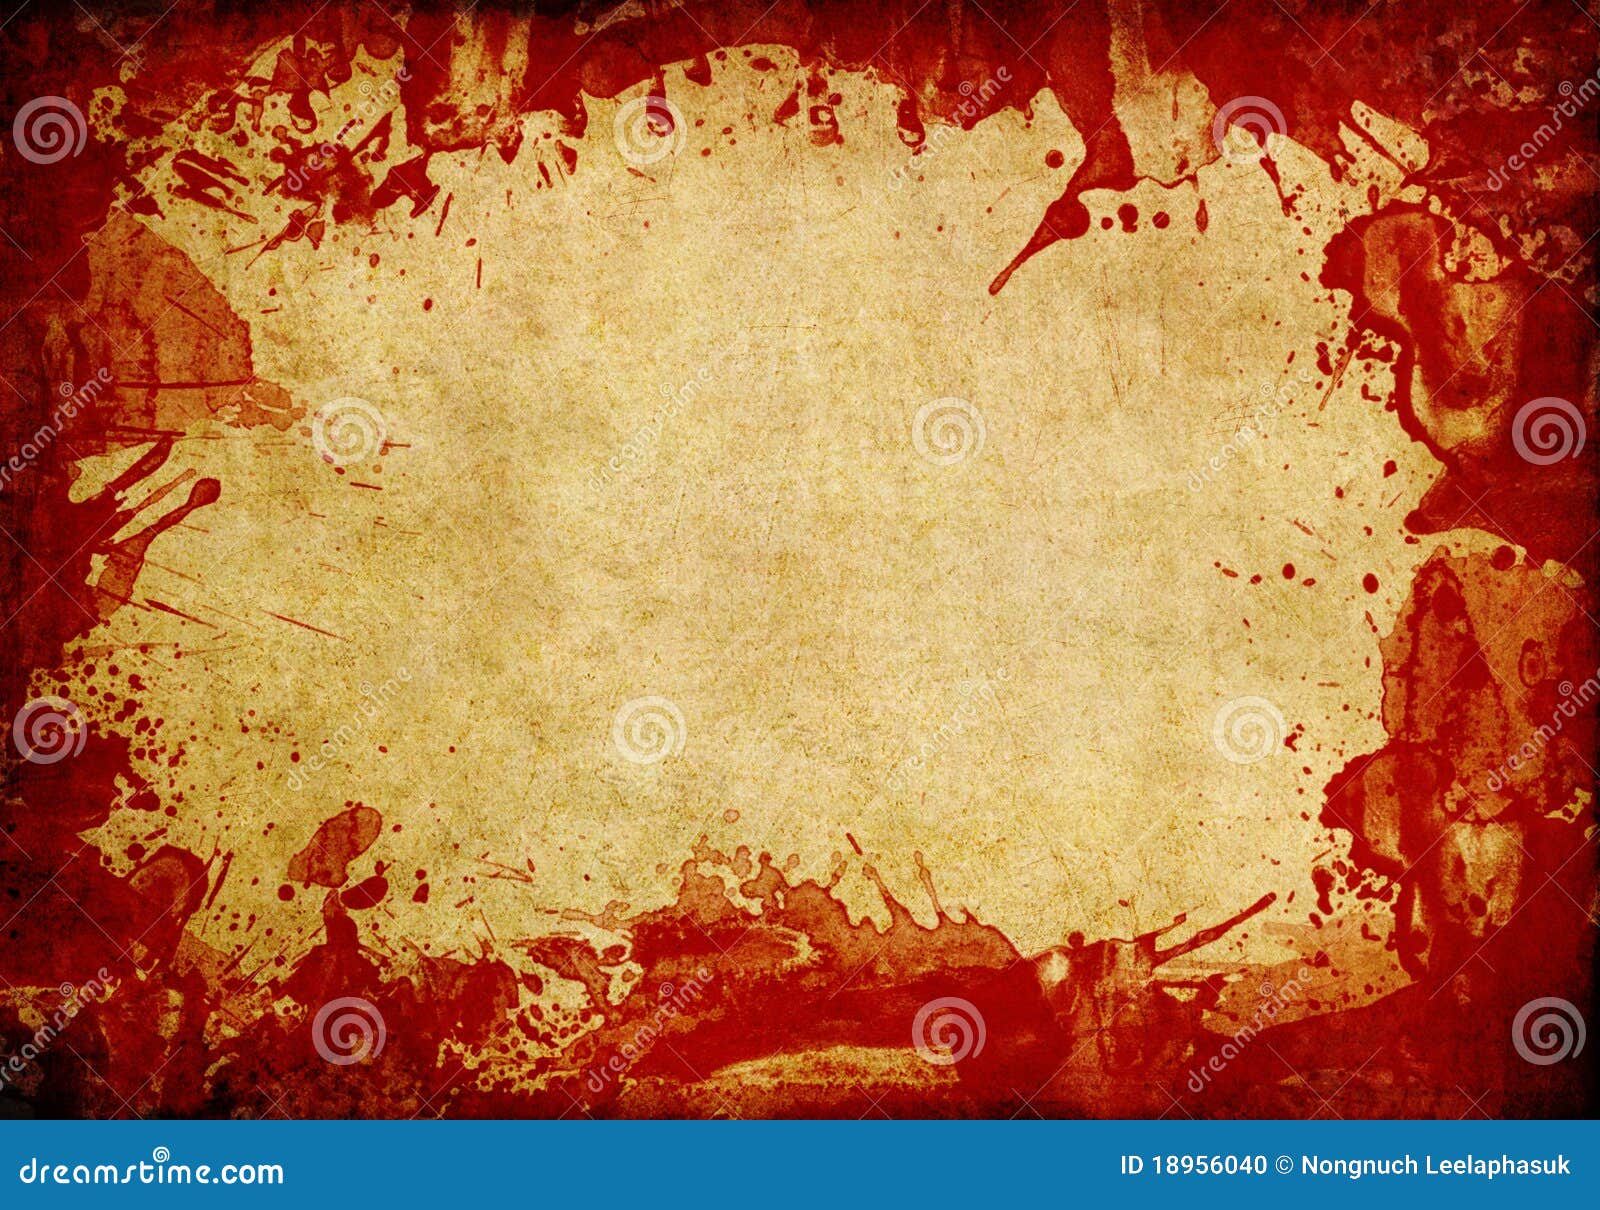 Old Paper Background With Red Blood Splash Stock Photo 18956040 - Megapixl